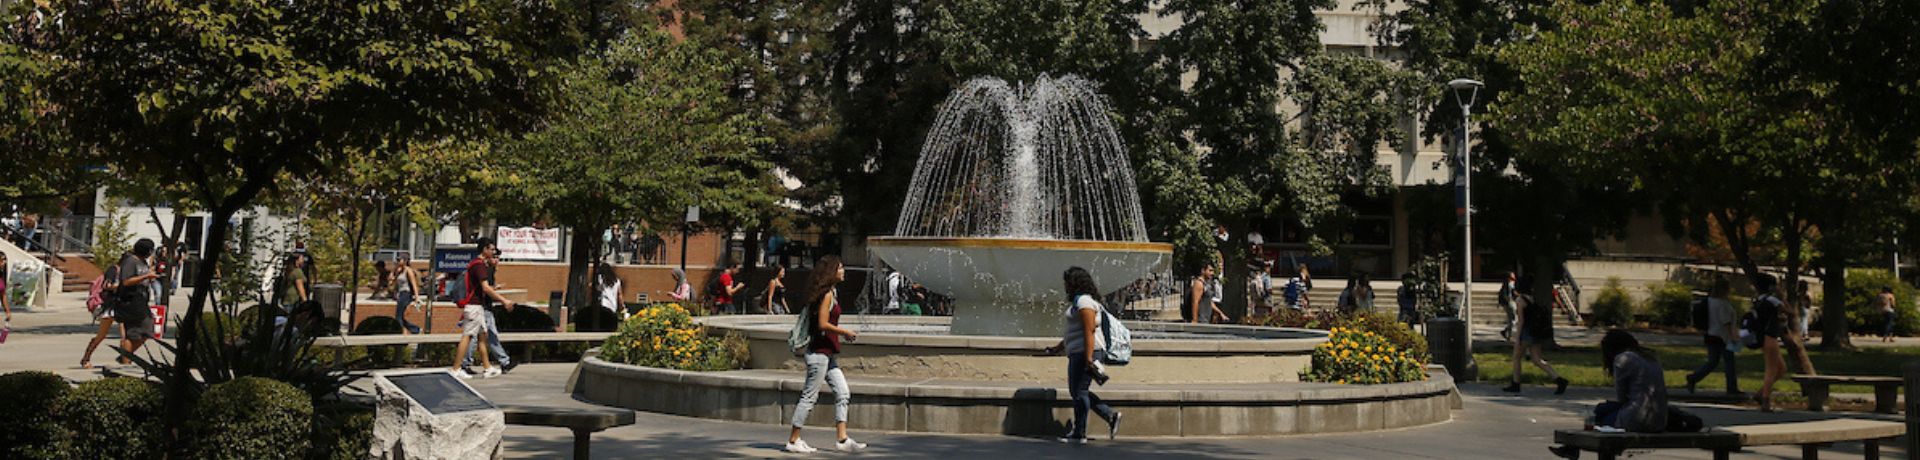 Students walking in front of the Fresno State fountain